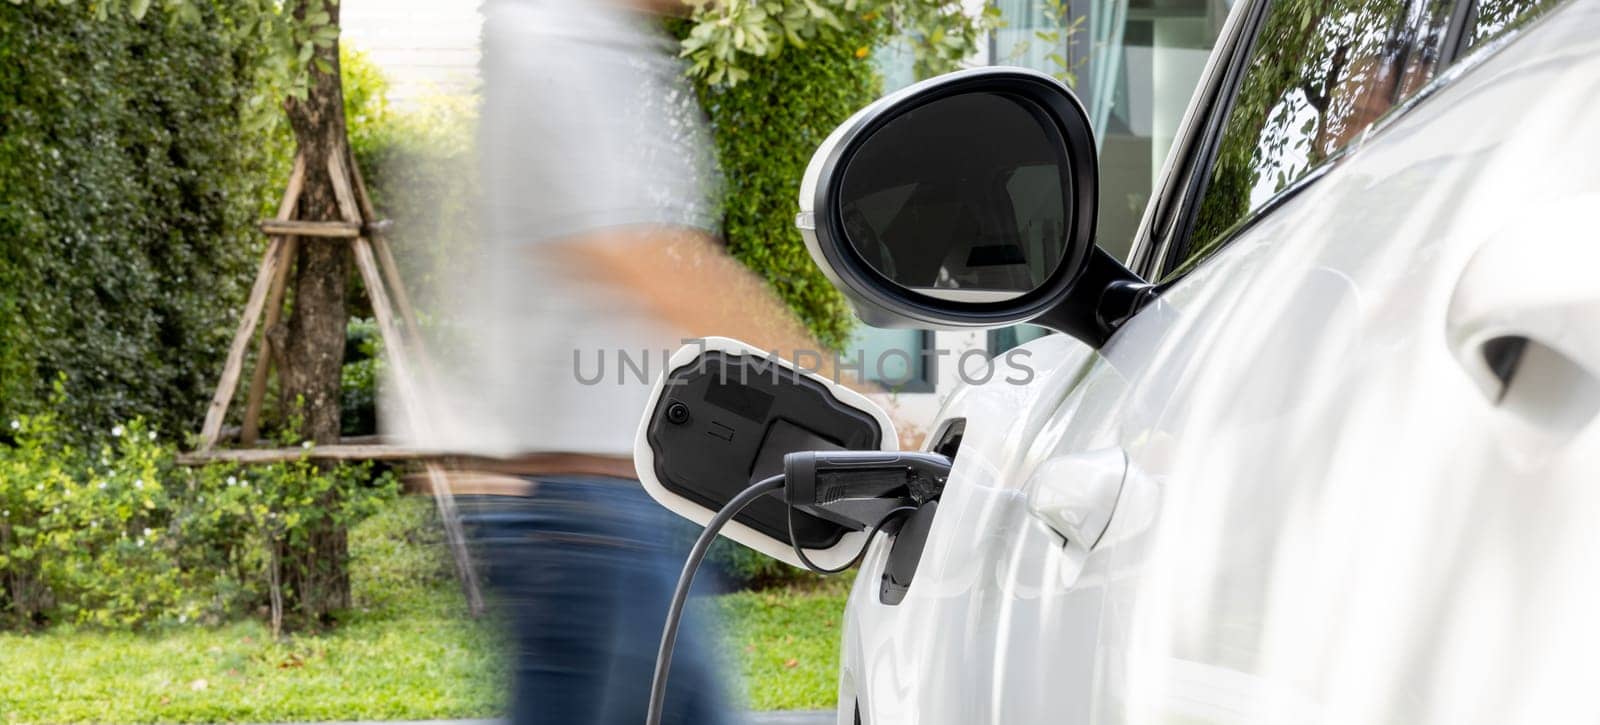 Focus recharging electric vehicle outdoor from charging station with motion blur background of man walking. Concept ideal for new progressive technology of green and renewable energy for electric car.